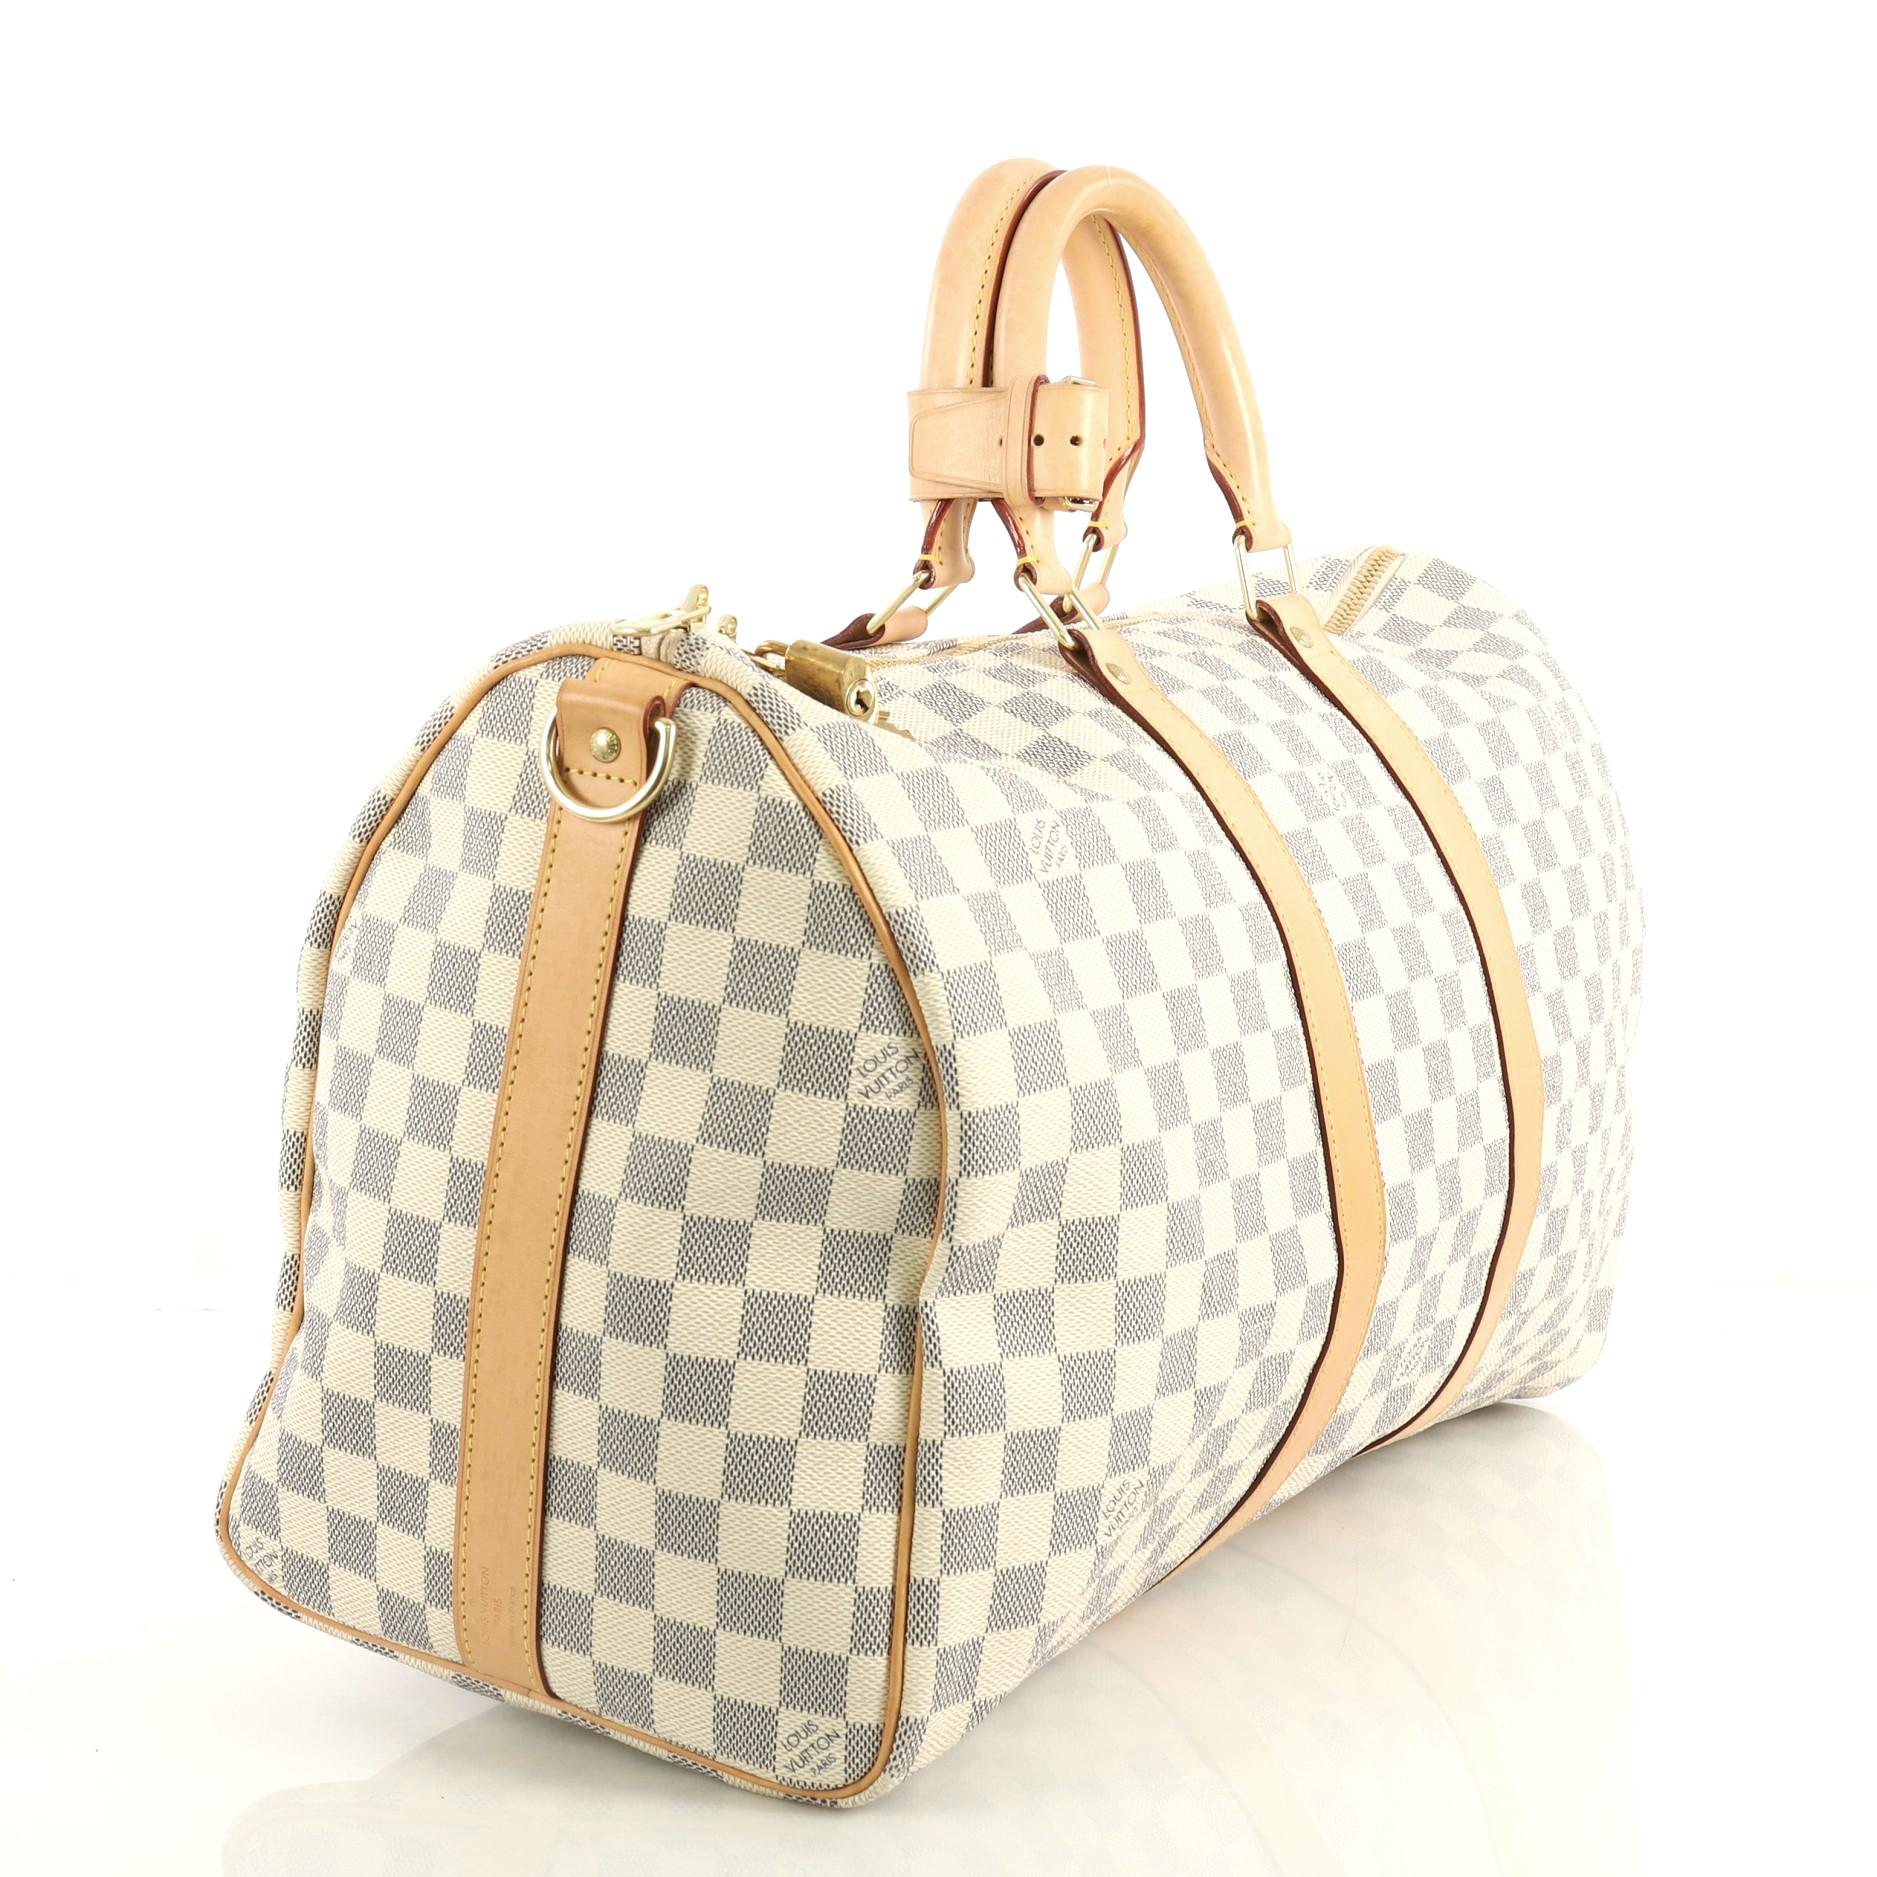 This Louis Vuitton Keepall Bandouliere Bag Damier 45, crafted from damier azur coated canvas, features dual rolled handles, leather trim, and gold-tone hardware. Its two-way top zip closure opens to a neutral fabric interior. Authenticity code